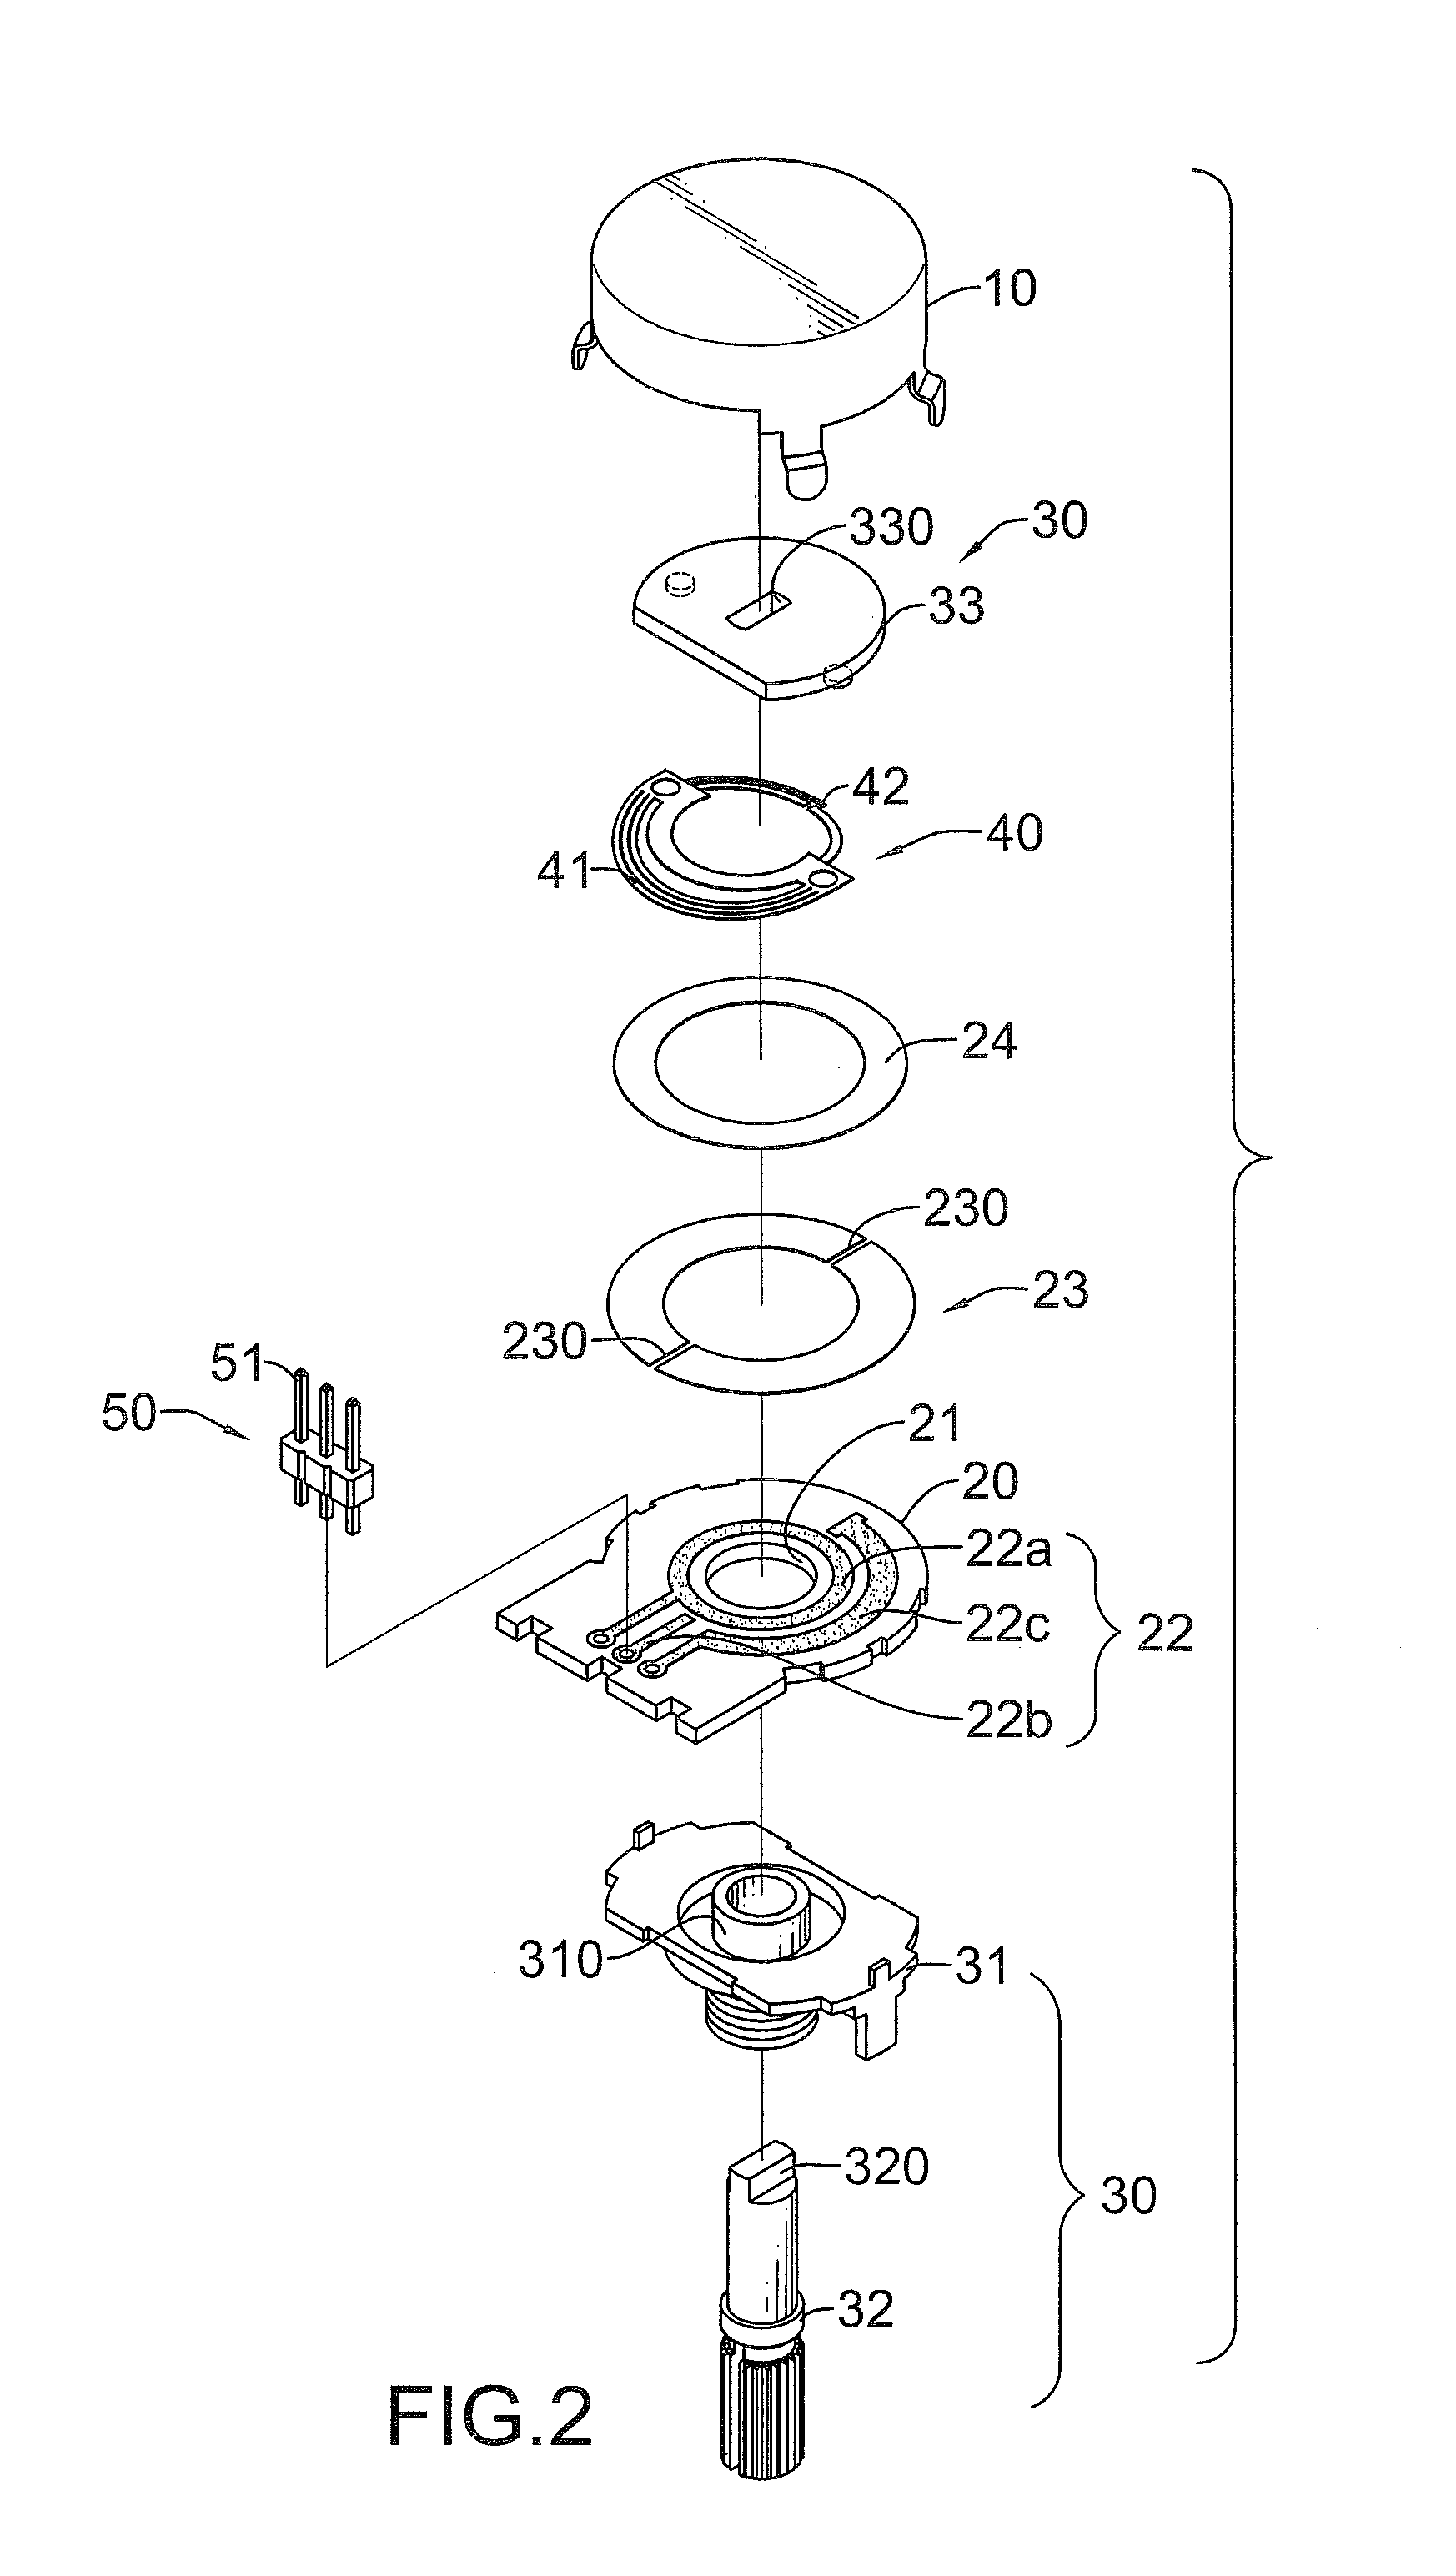 Variable resistor without rotation angle limitation and having regular changes in resistance value